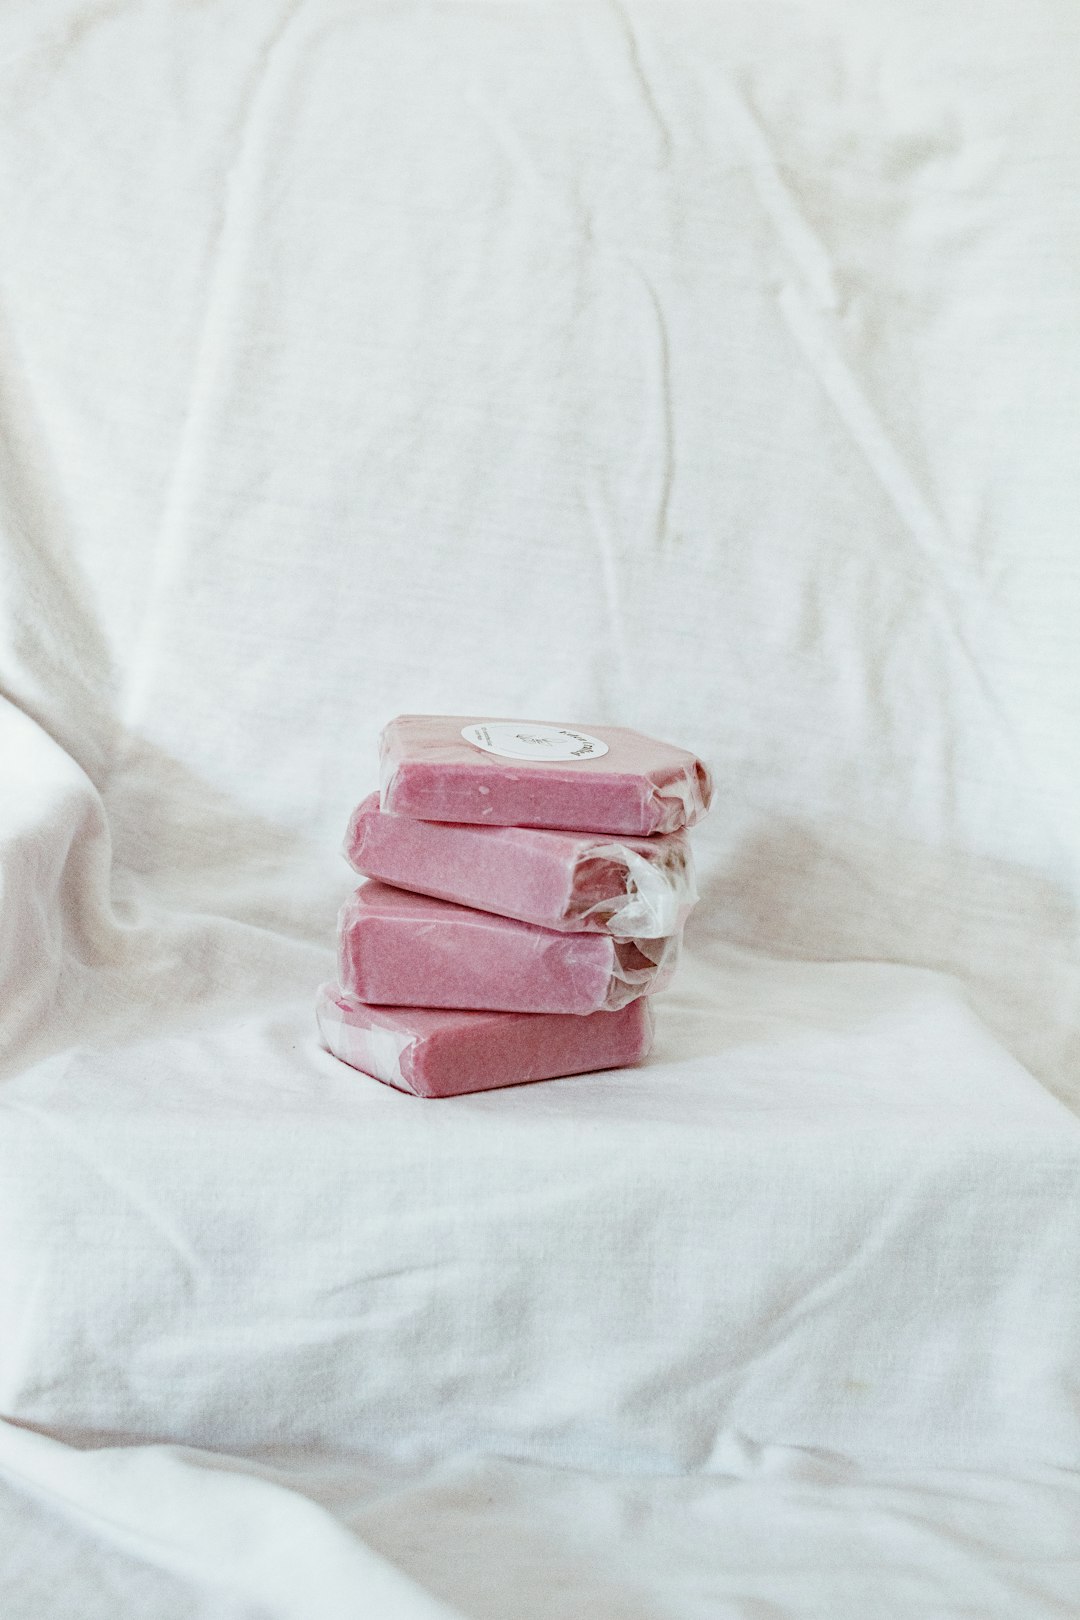 pink and white plastic container on white textile